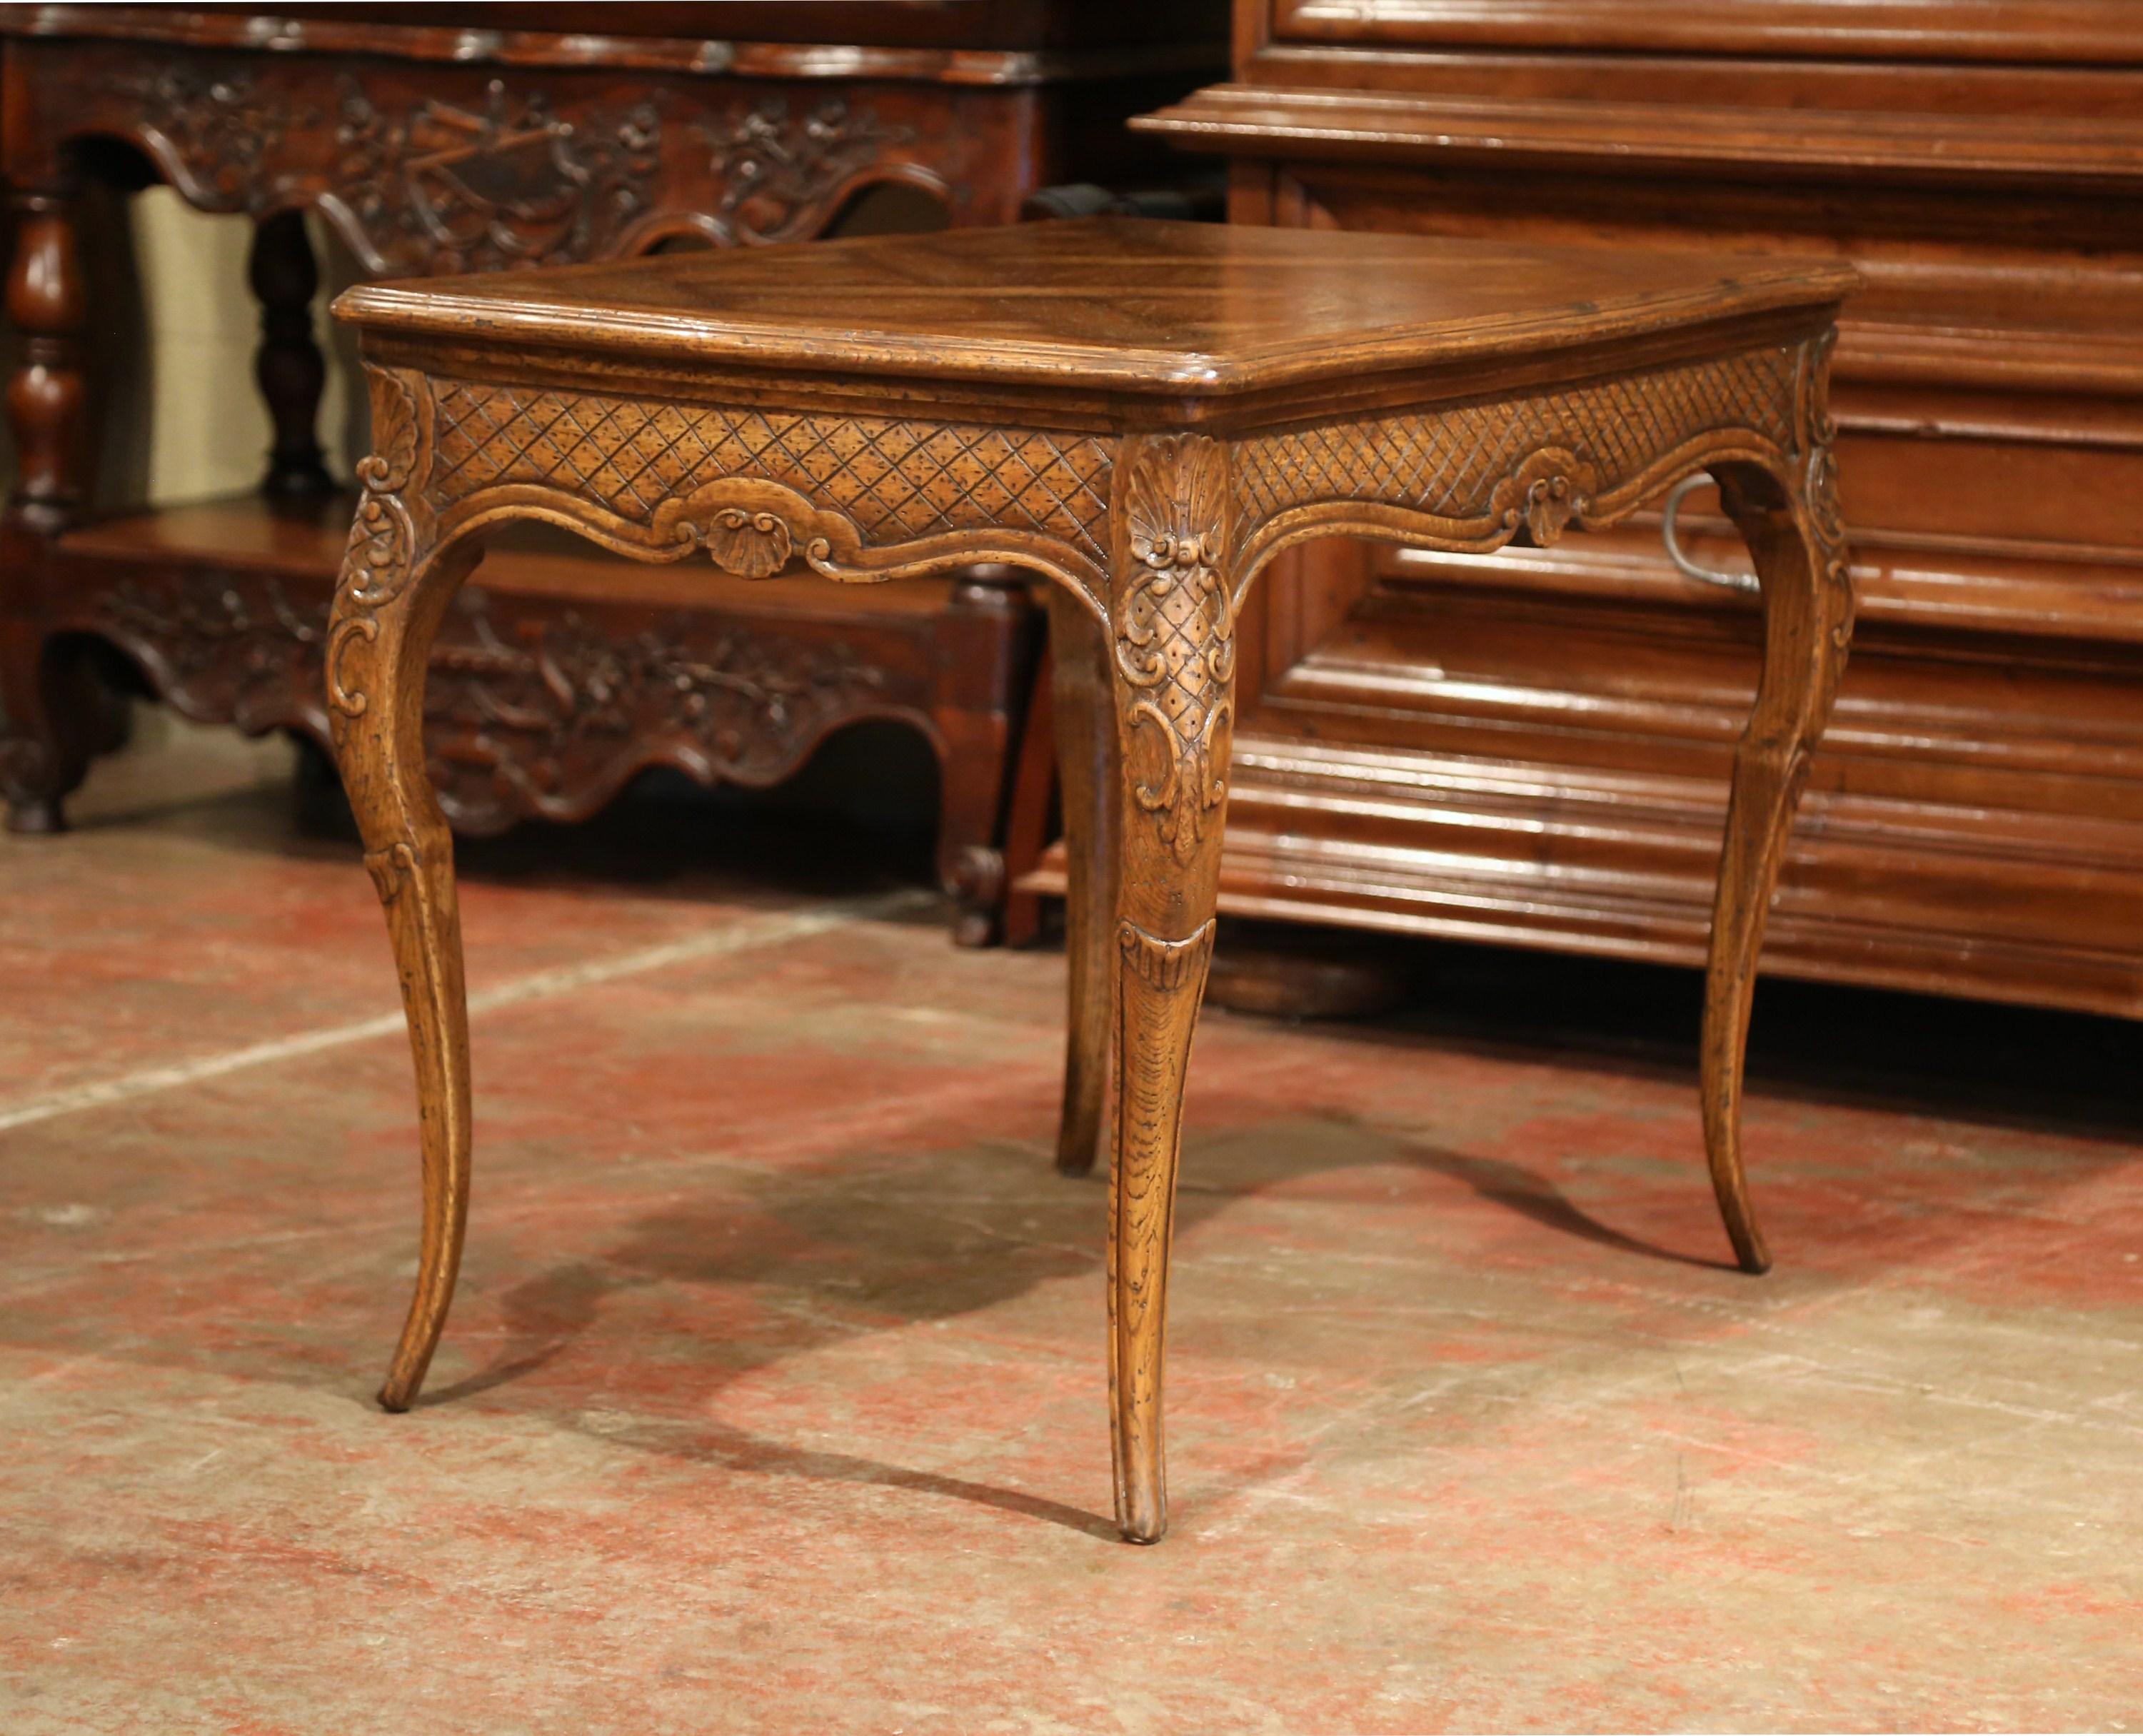 Midcentury French Louis XV Carved Oak Side Table with Inlay Parquetry Decor For Sale 2